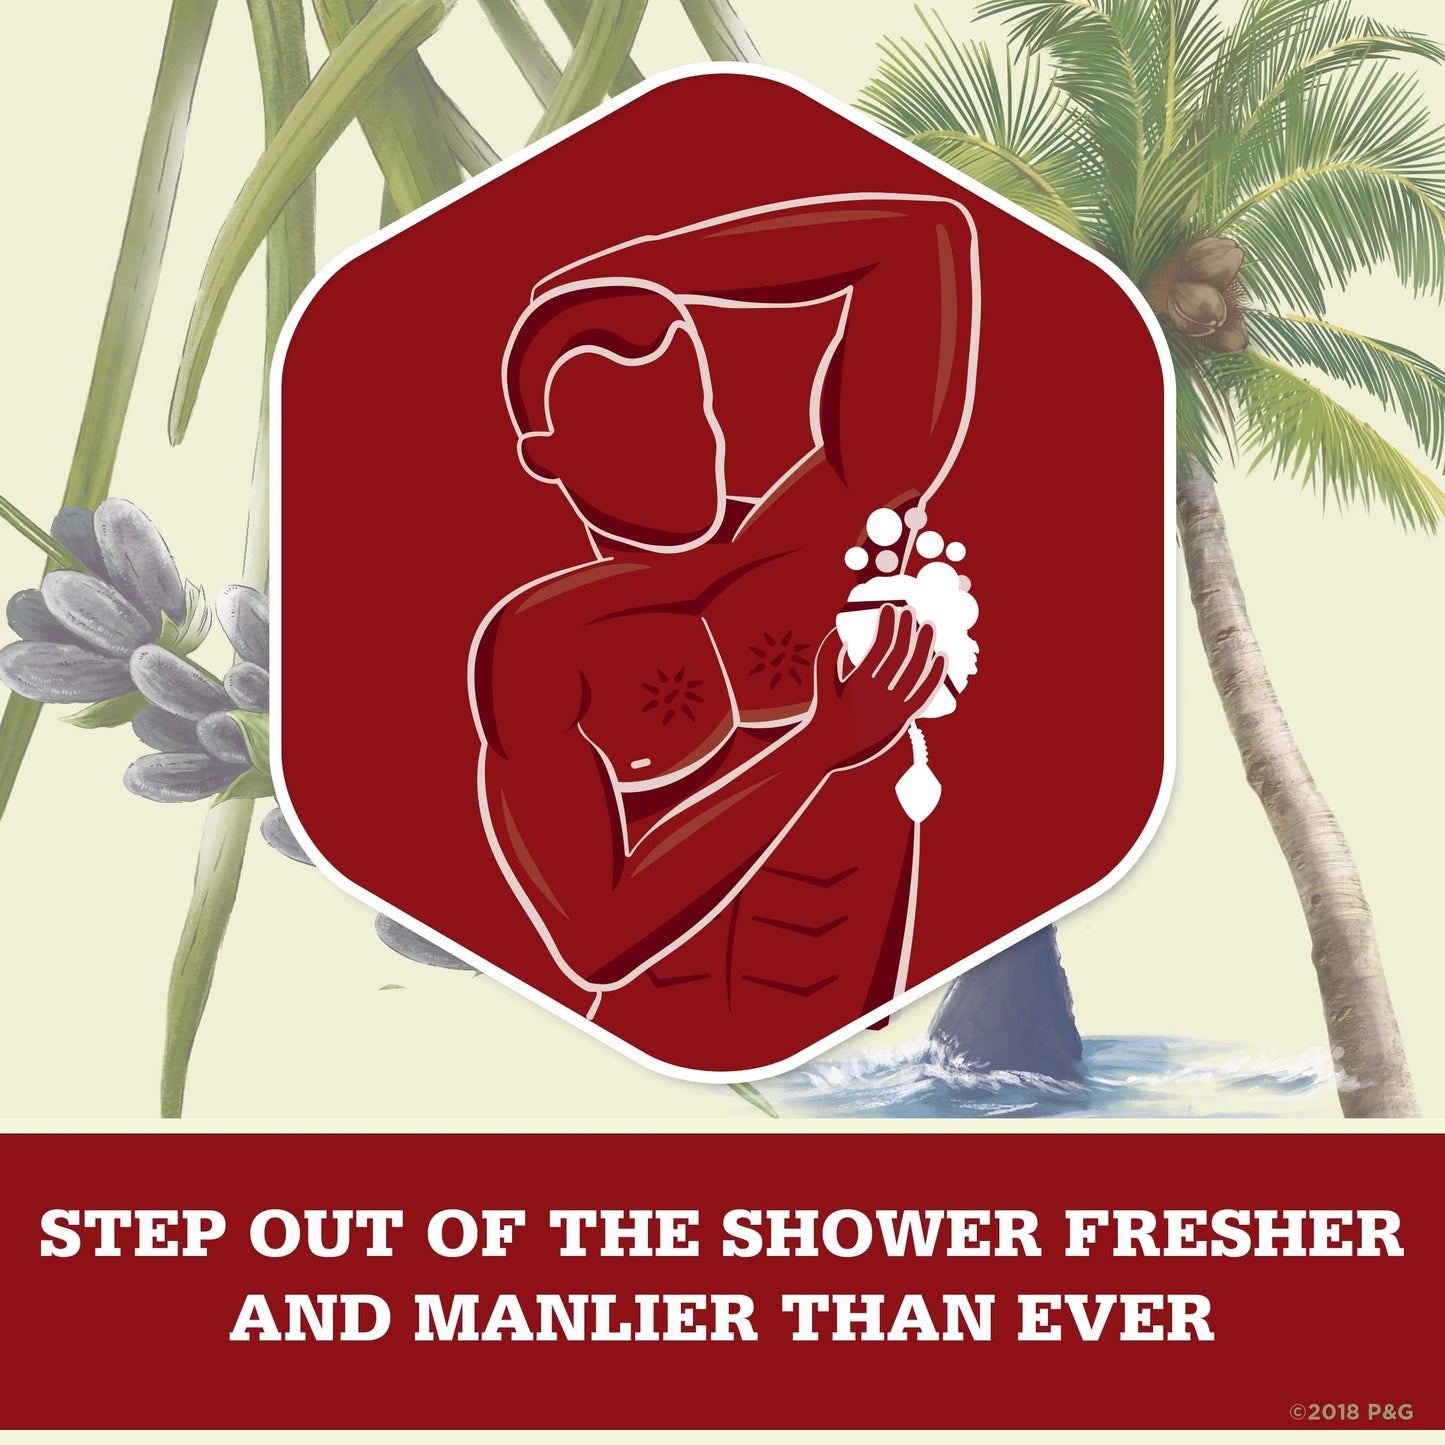 Old Spice Body Wash for Men, Fresher Fiji Scent, Fresher Collection, 30 Fl Oz (Pack of 4)